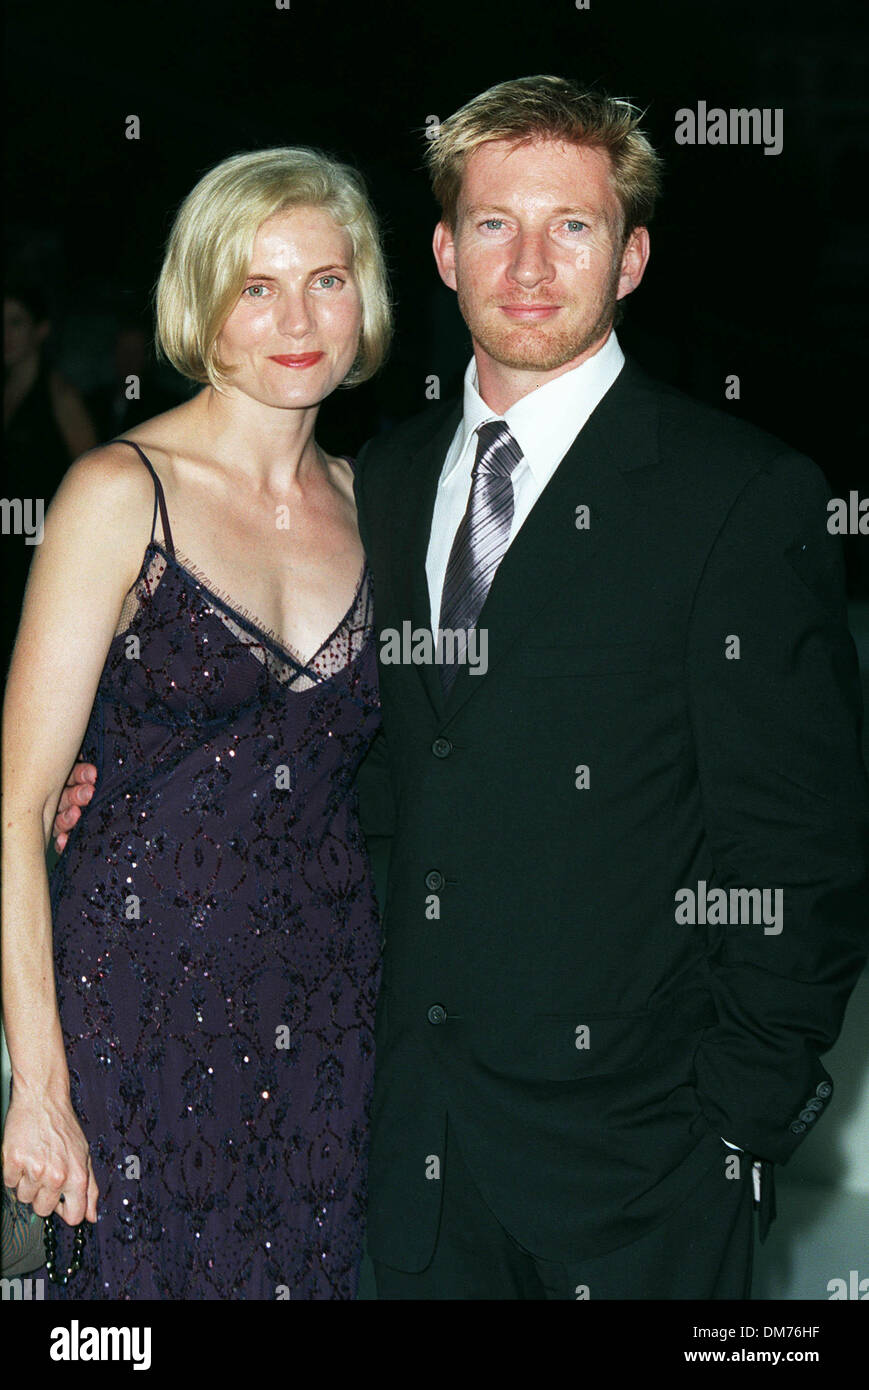 DAVID WENHAM AND KATE.ACTOR AND WIFE.LY.VENICE FILM FESTIVAL 2001, ITA.29/08/2001.BK39D22C. Stock Photo